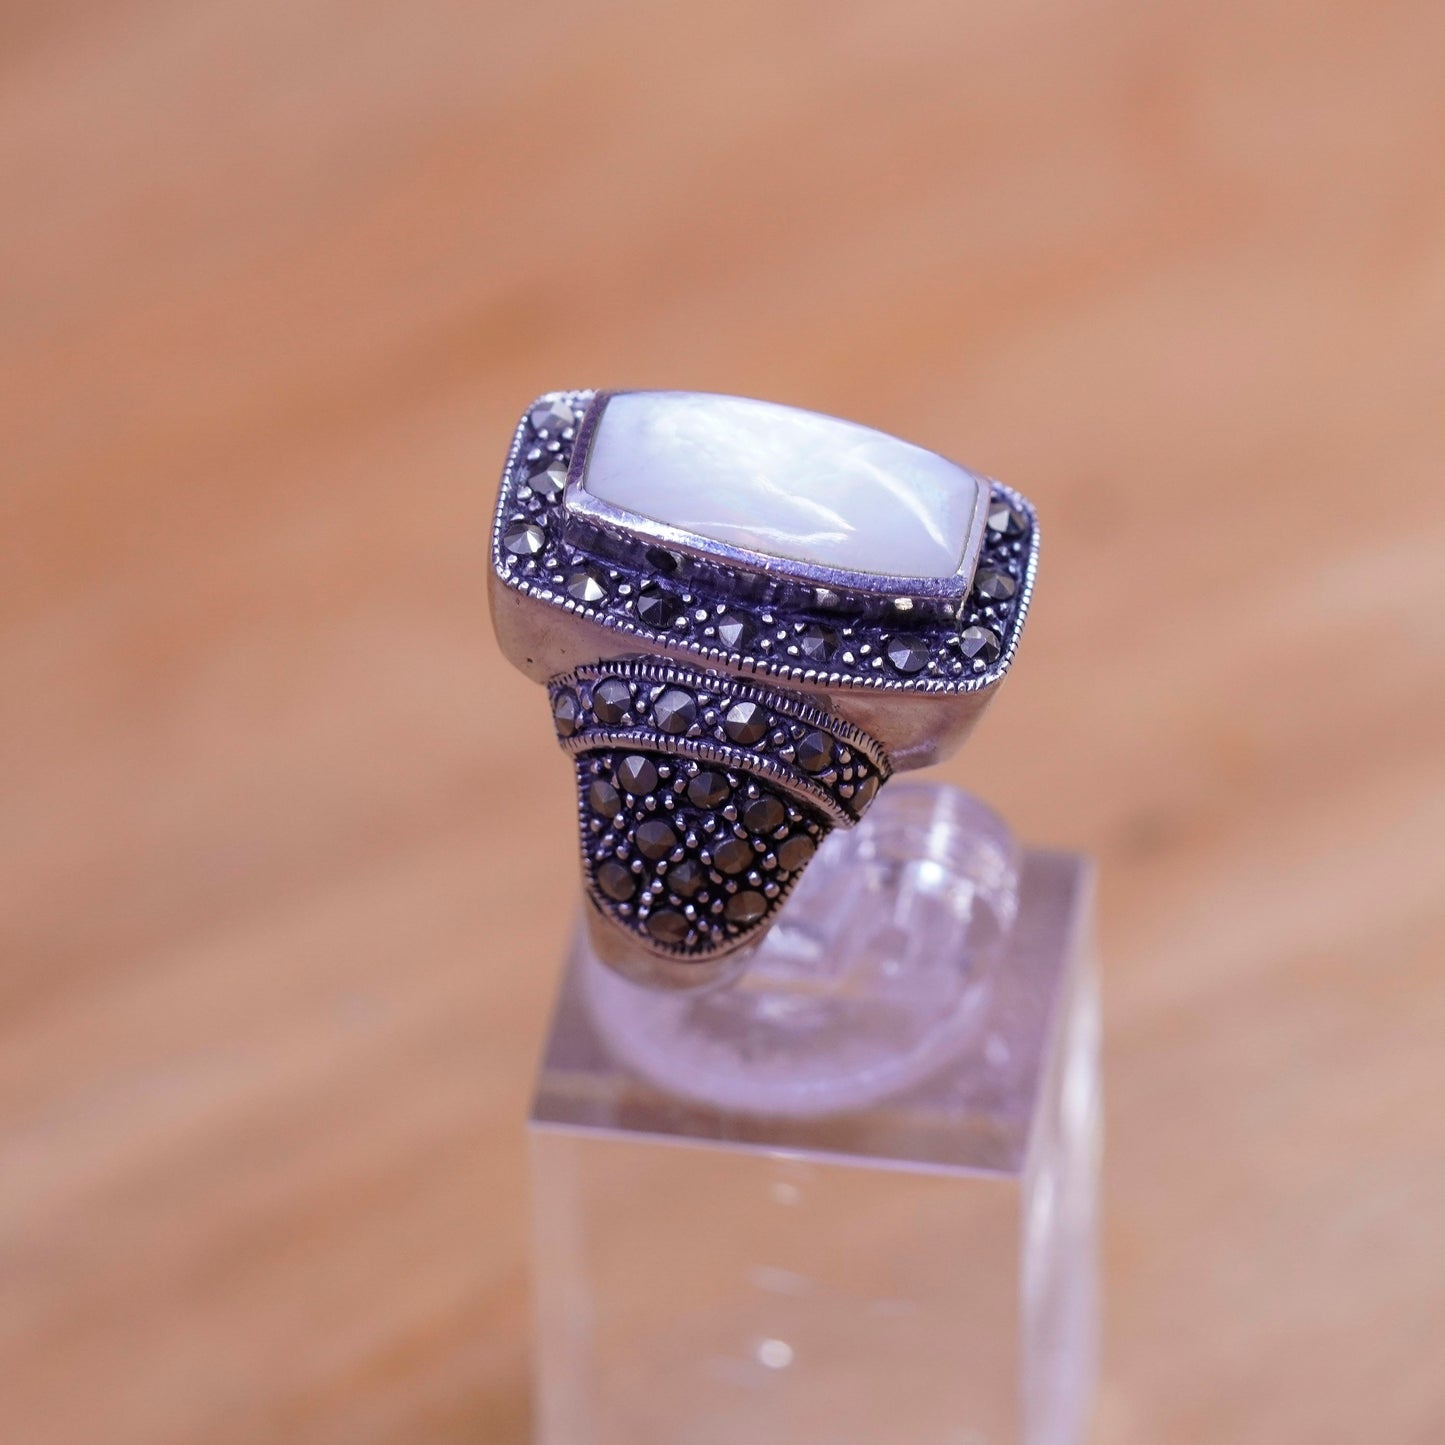 Size 6, vintage Sterling 925 silver handmade ring with moonstone marcasite